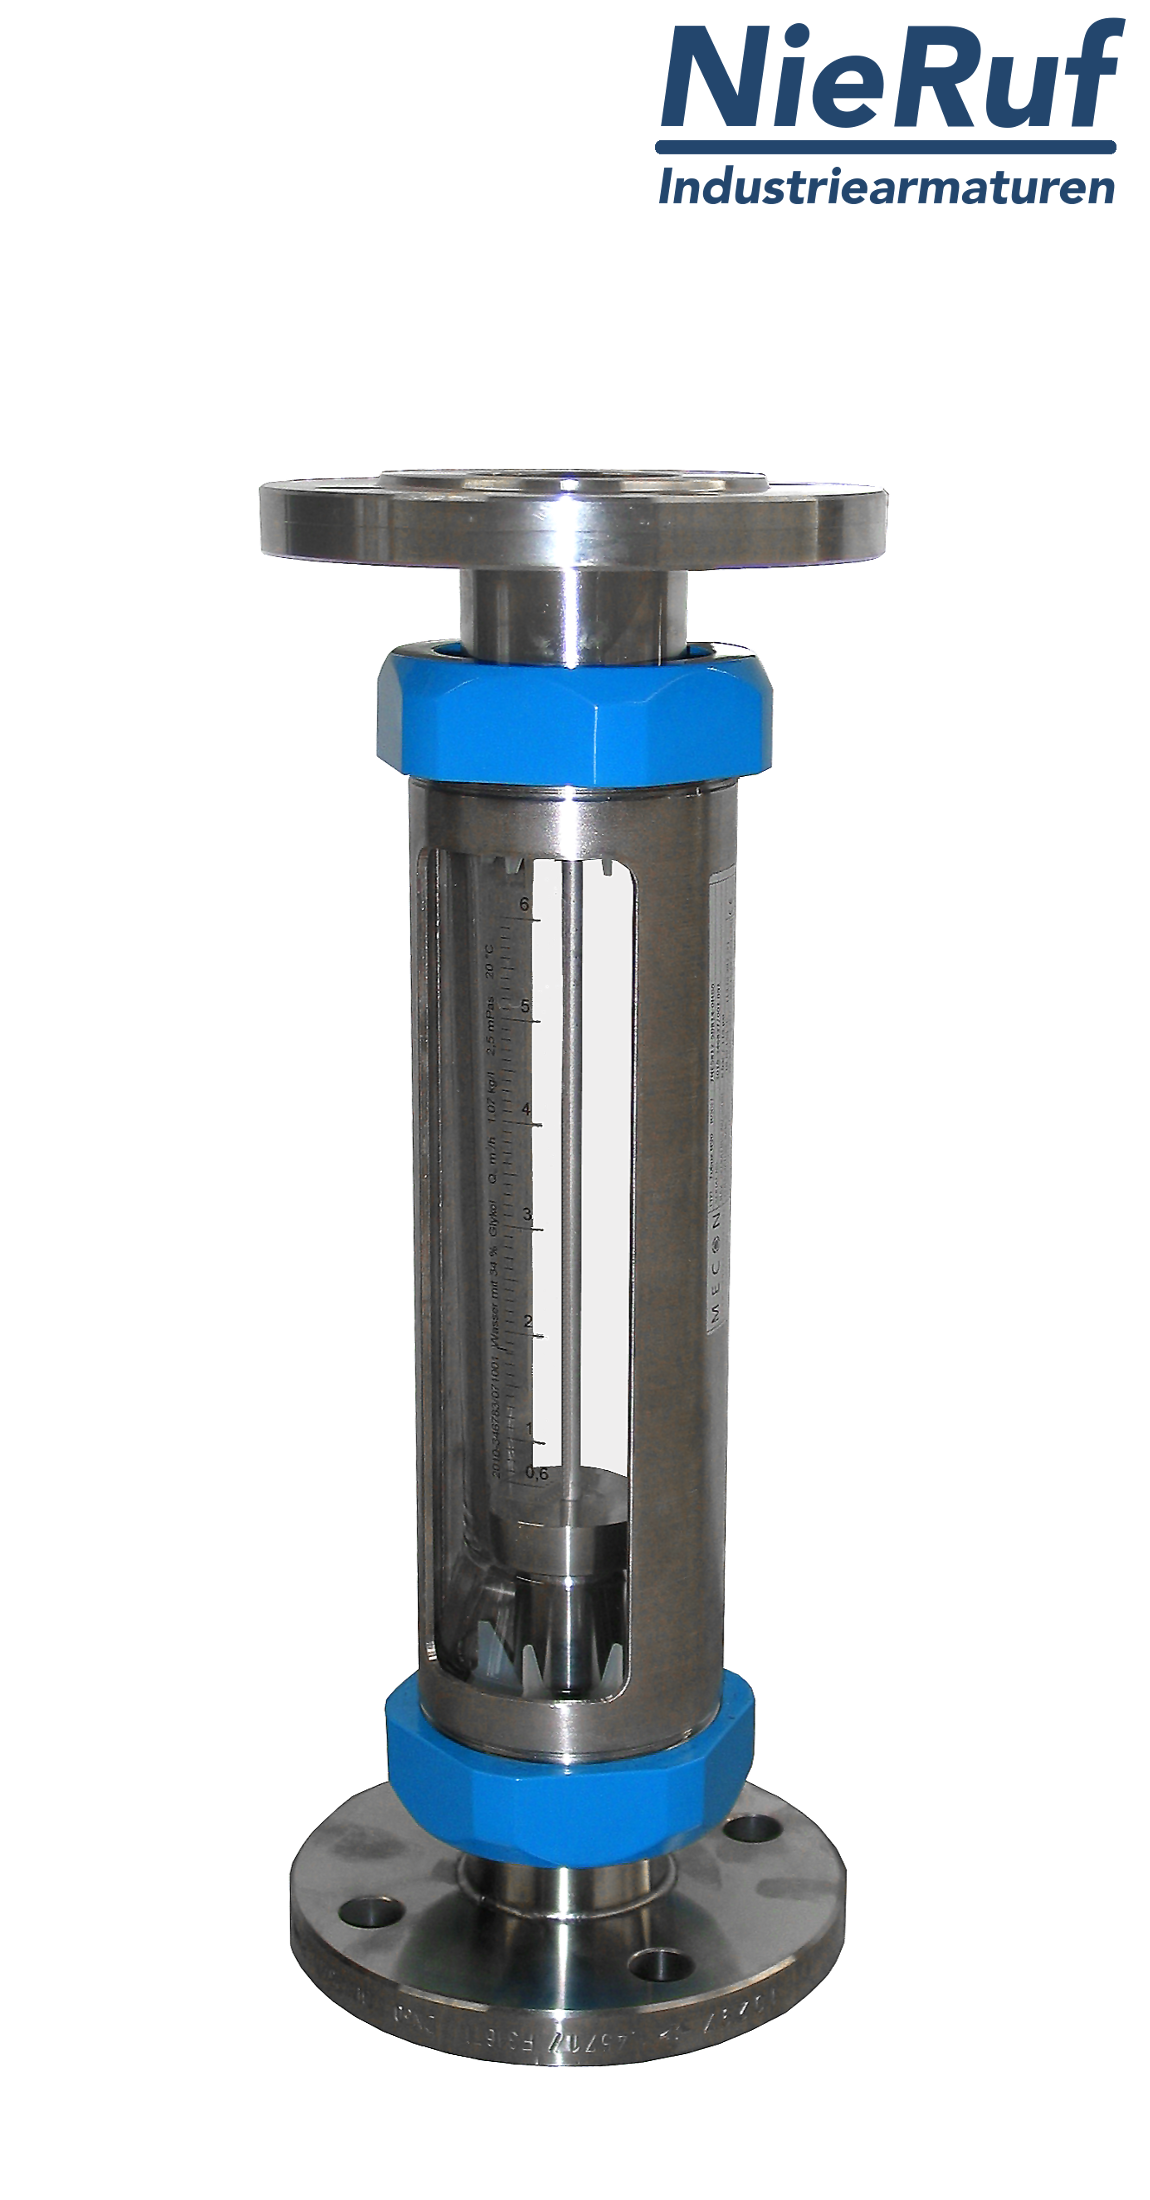 Variable area flowmeter stainless steel + borosilicate flange DN40 65.0 - 650 l/h water FKM